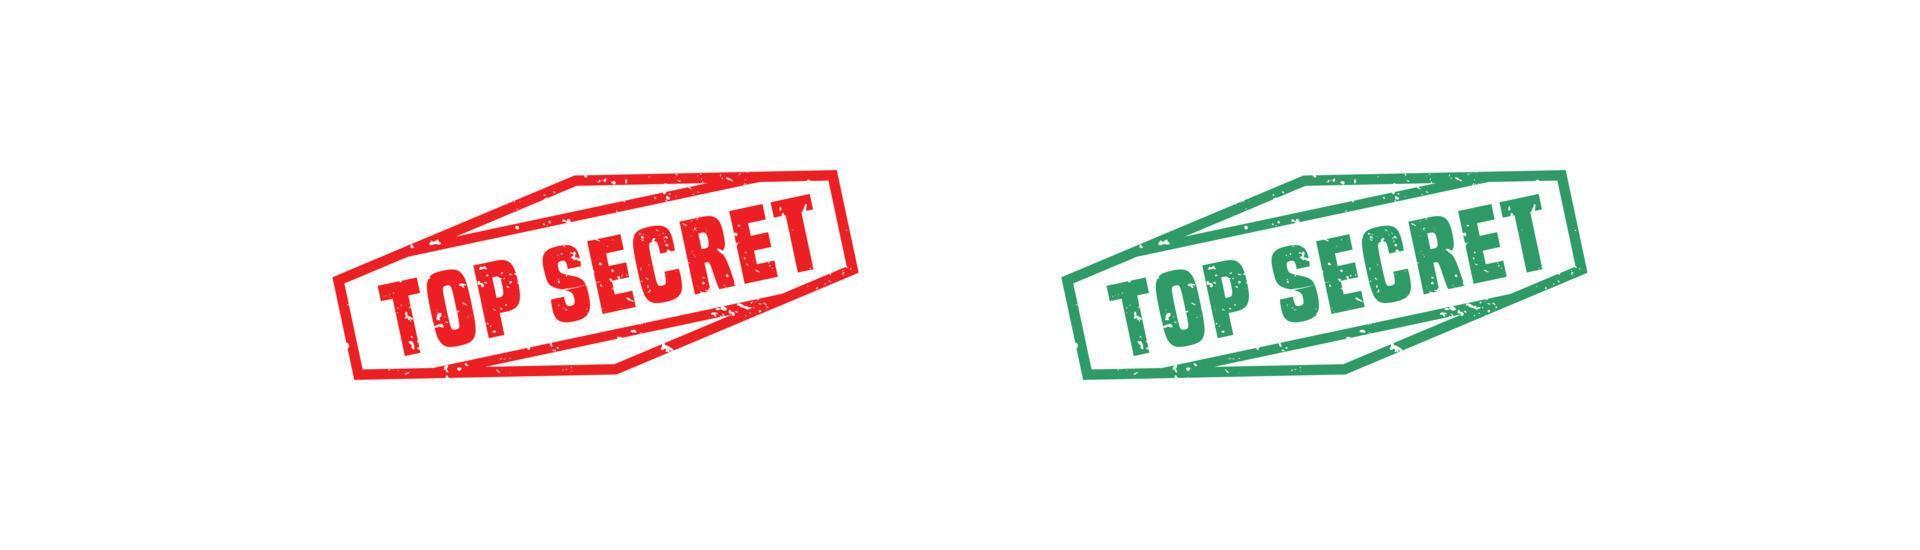 Top secret stamp rubber with grunge style on white background. vector